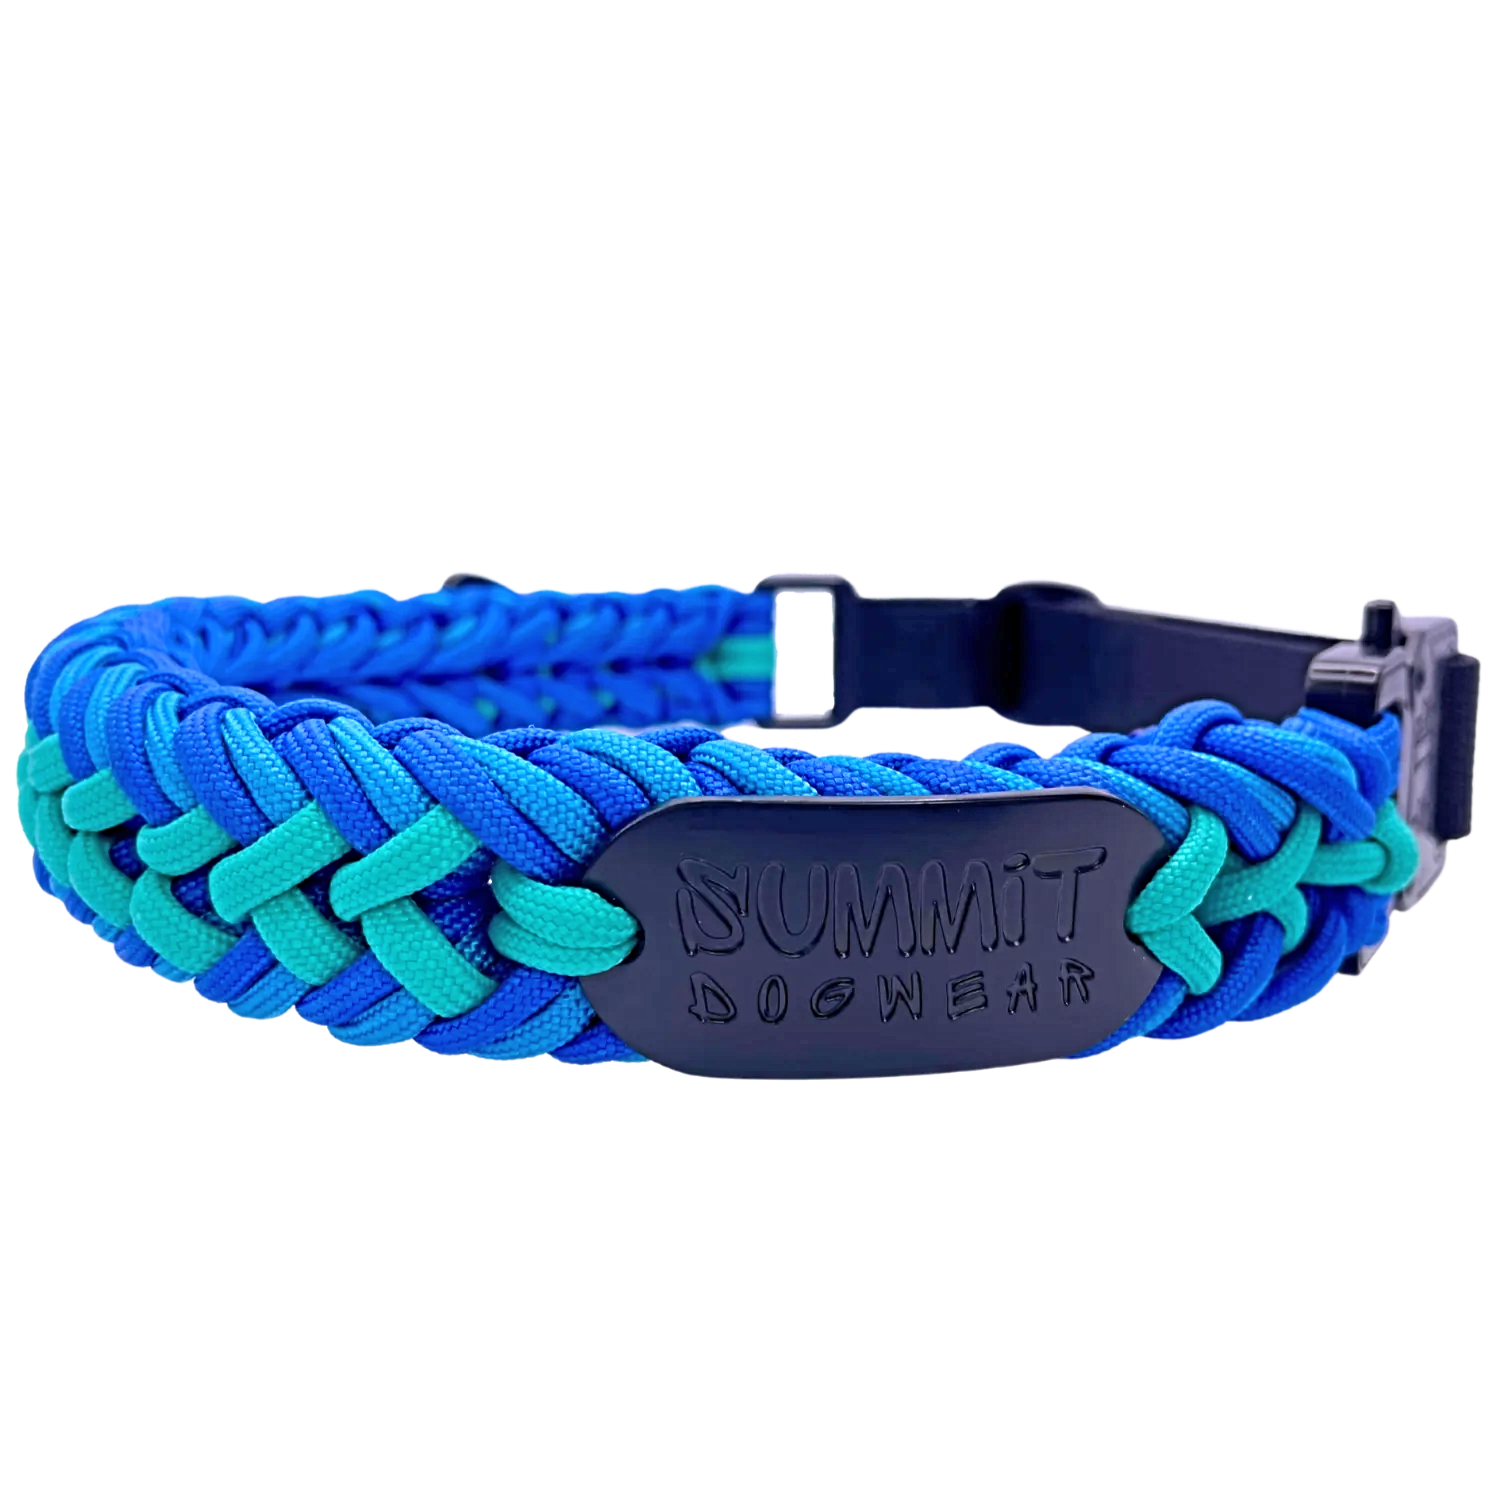 Premium Paracord Collar with Black Tactical hardware and A Quick Release Buckle In Teal and Blue